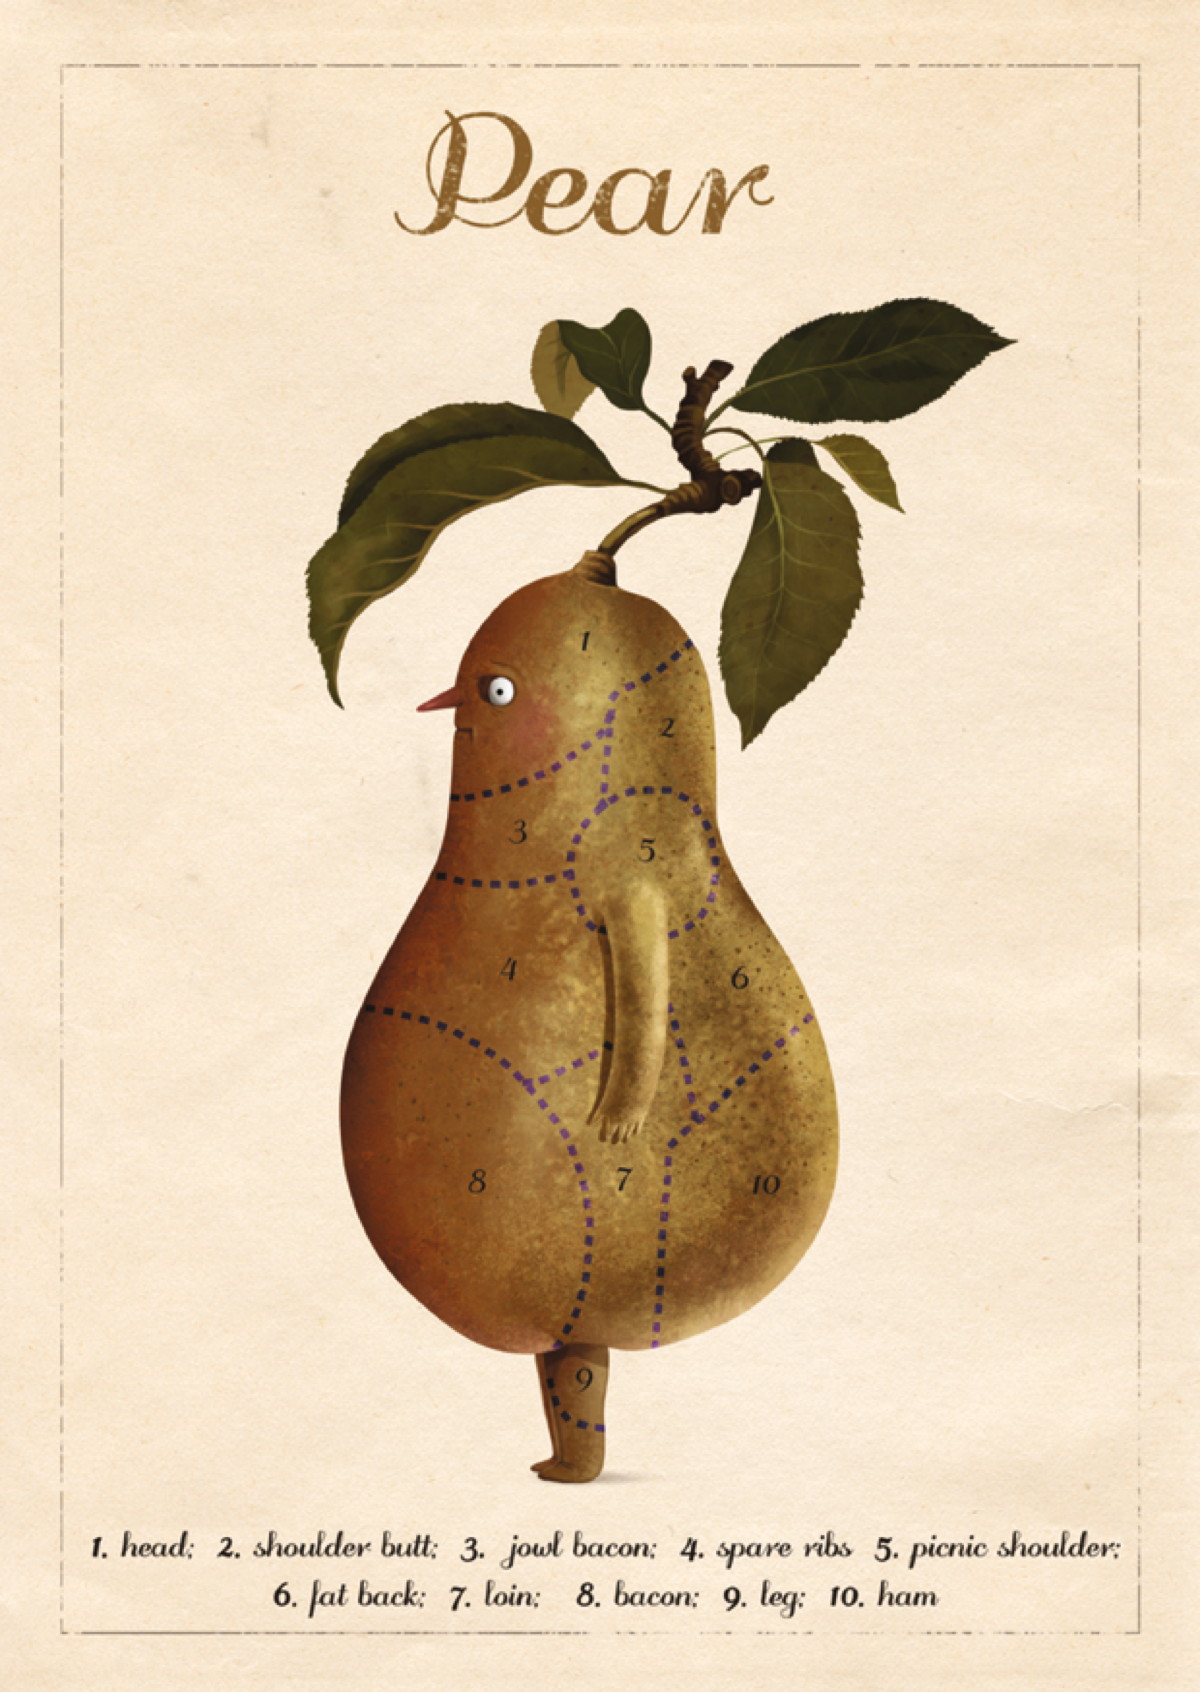 Pear science